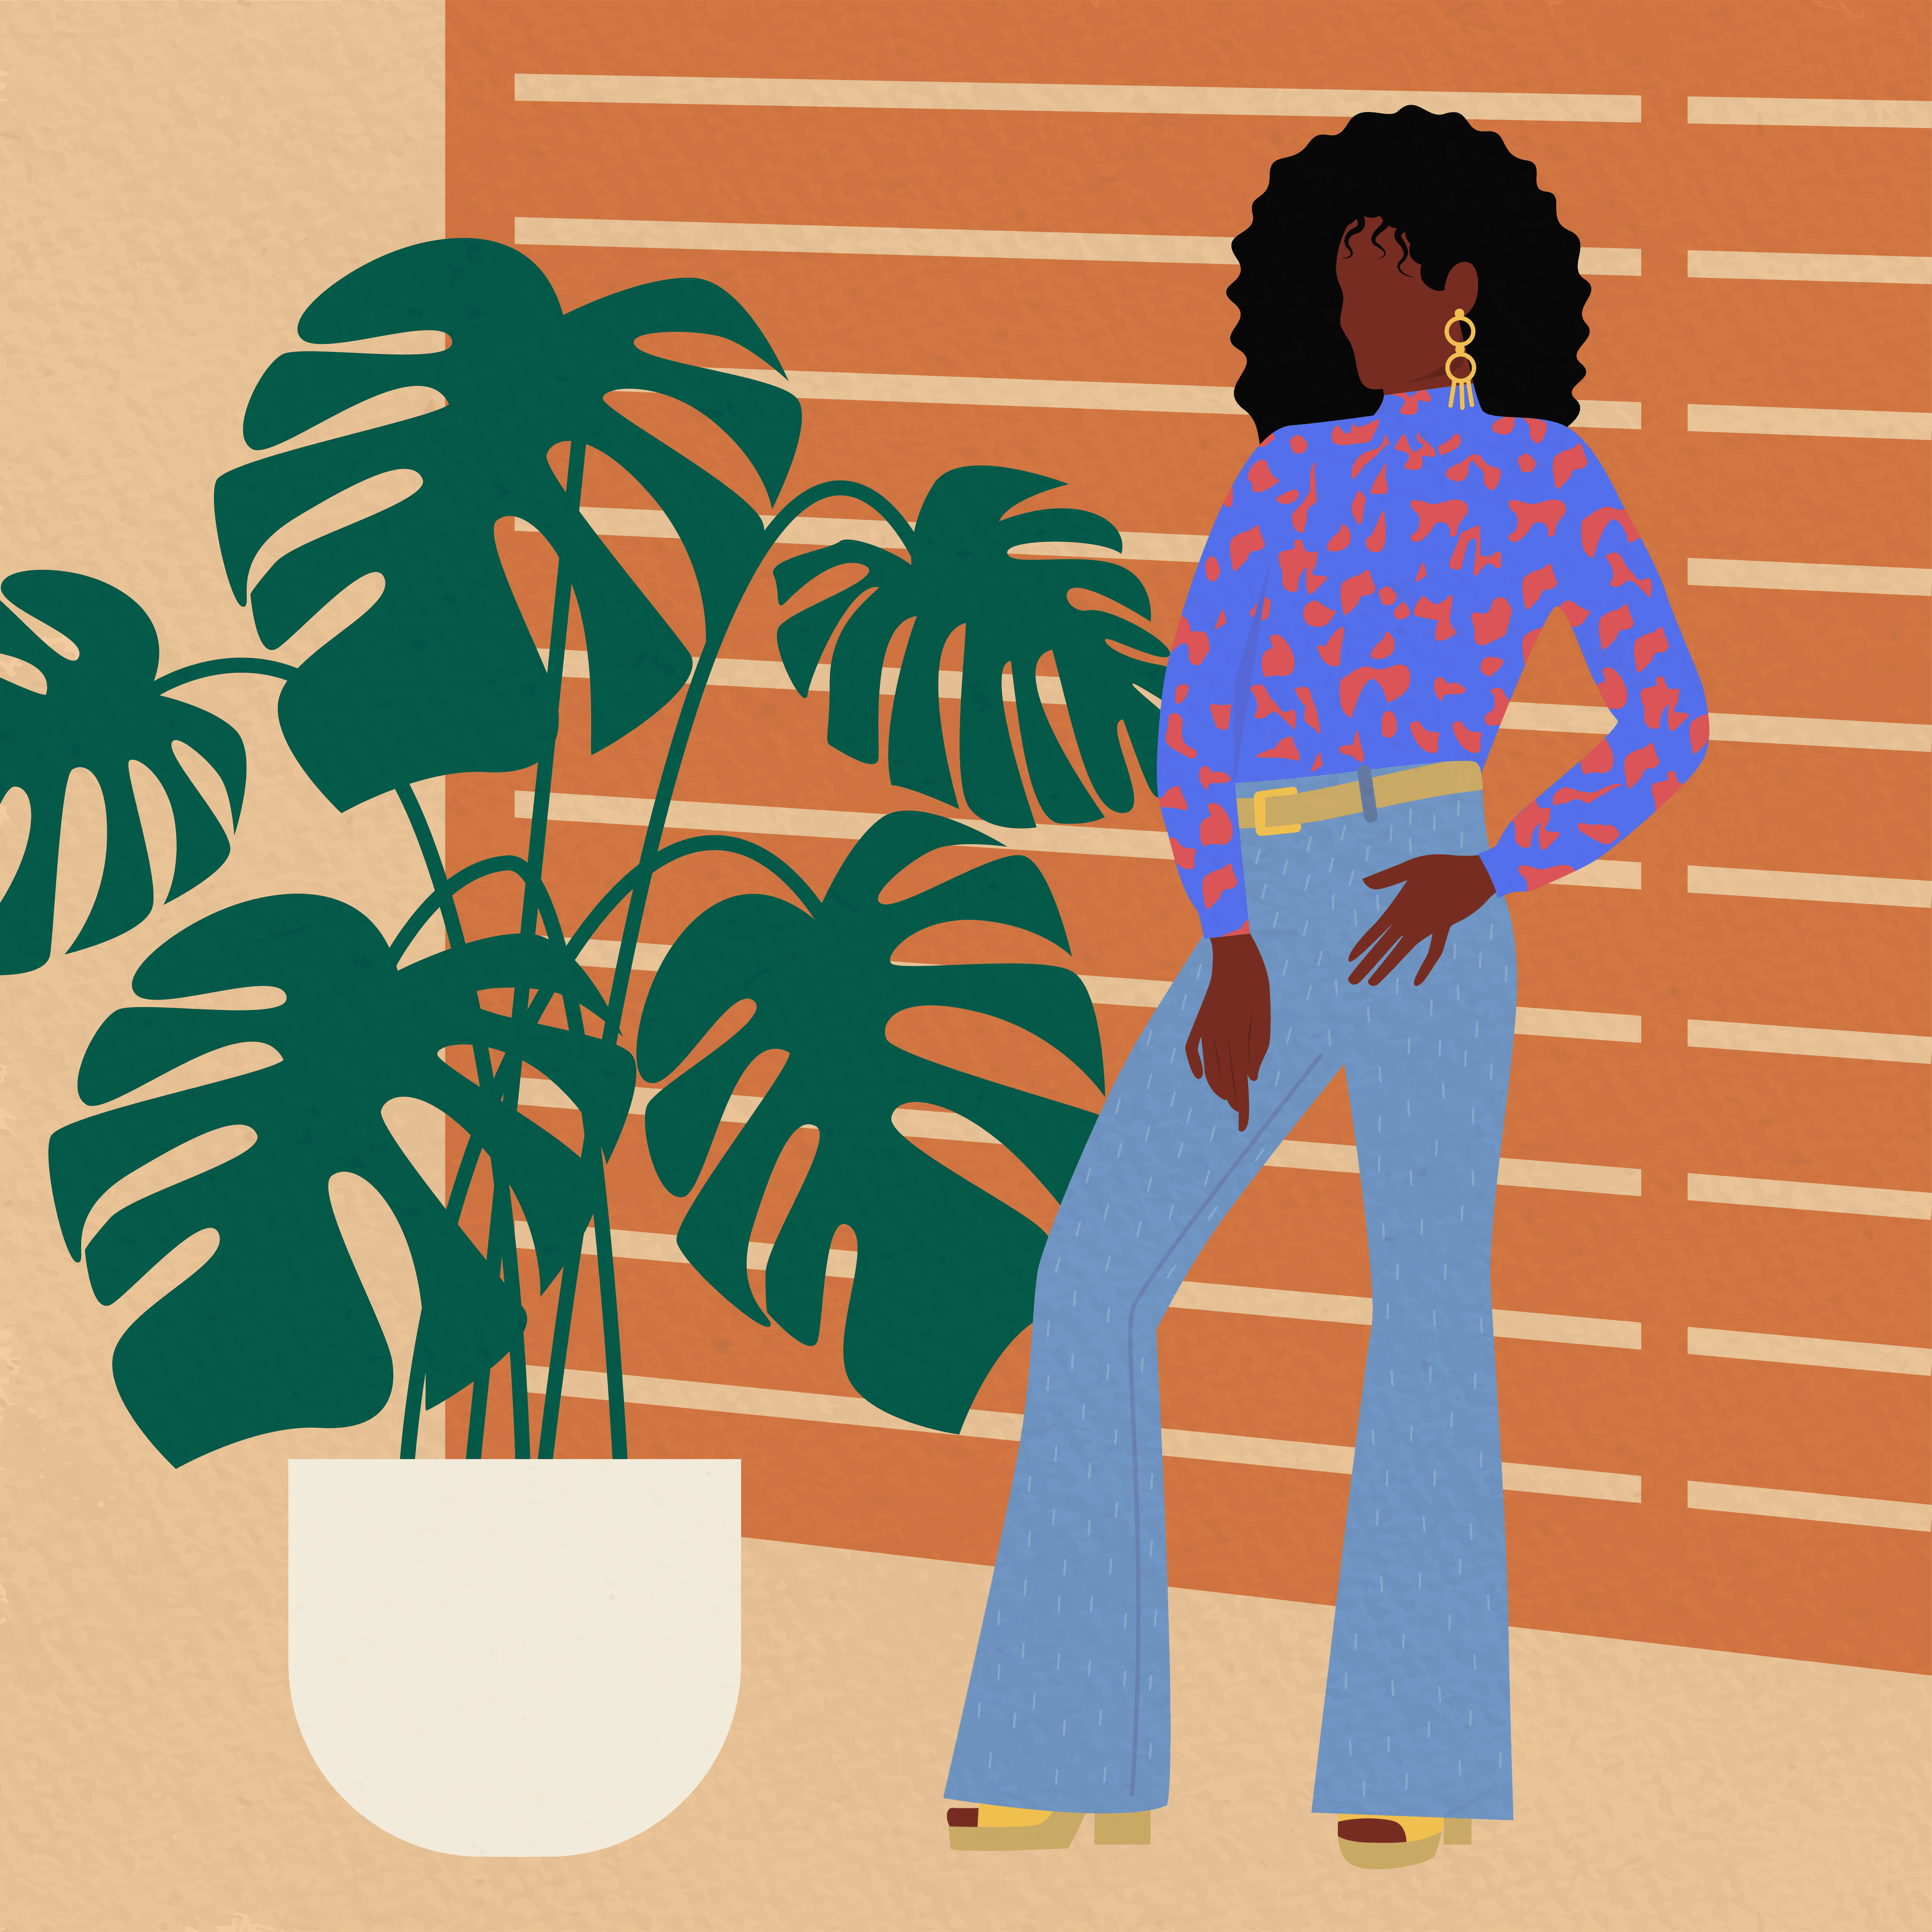 The 70s Woman